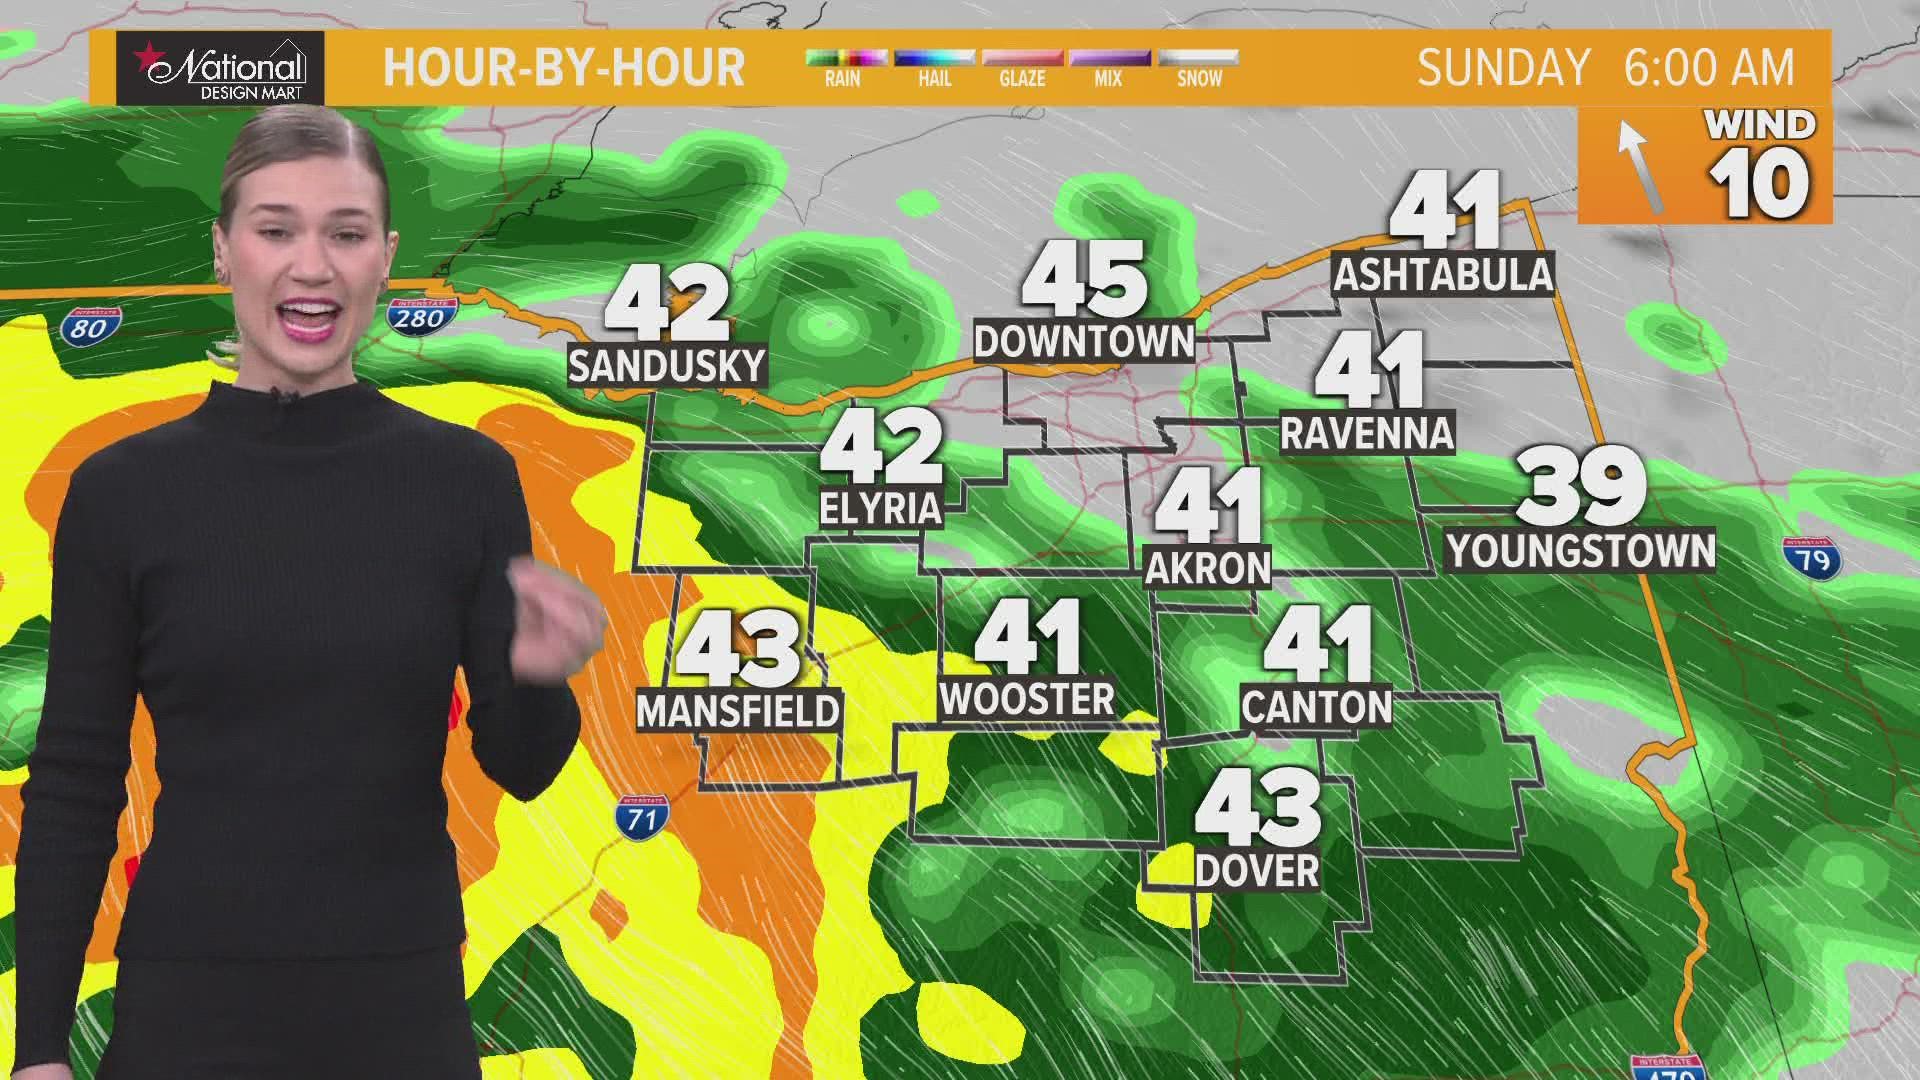 Payton says temps will be in the 50s today, but we should expect to see heavy rain starting Sunday morning